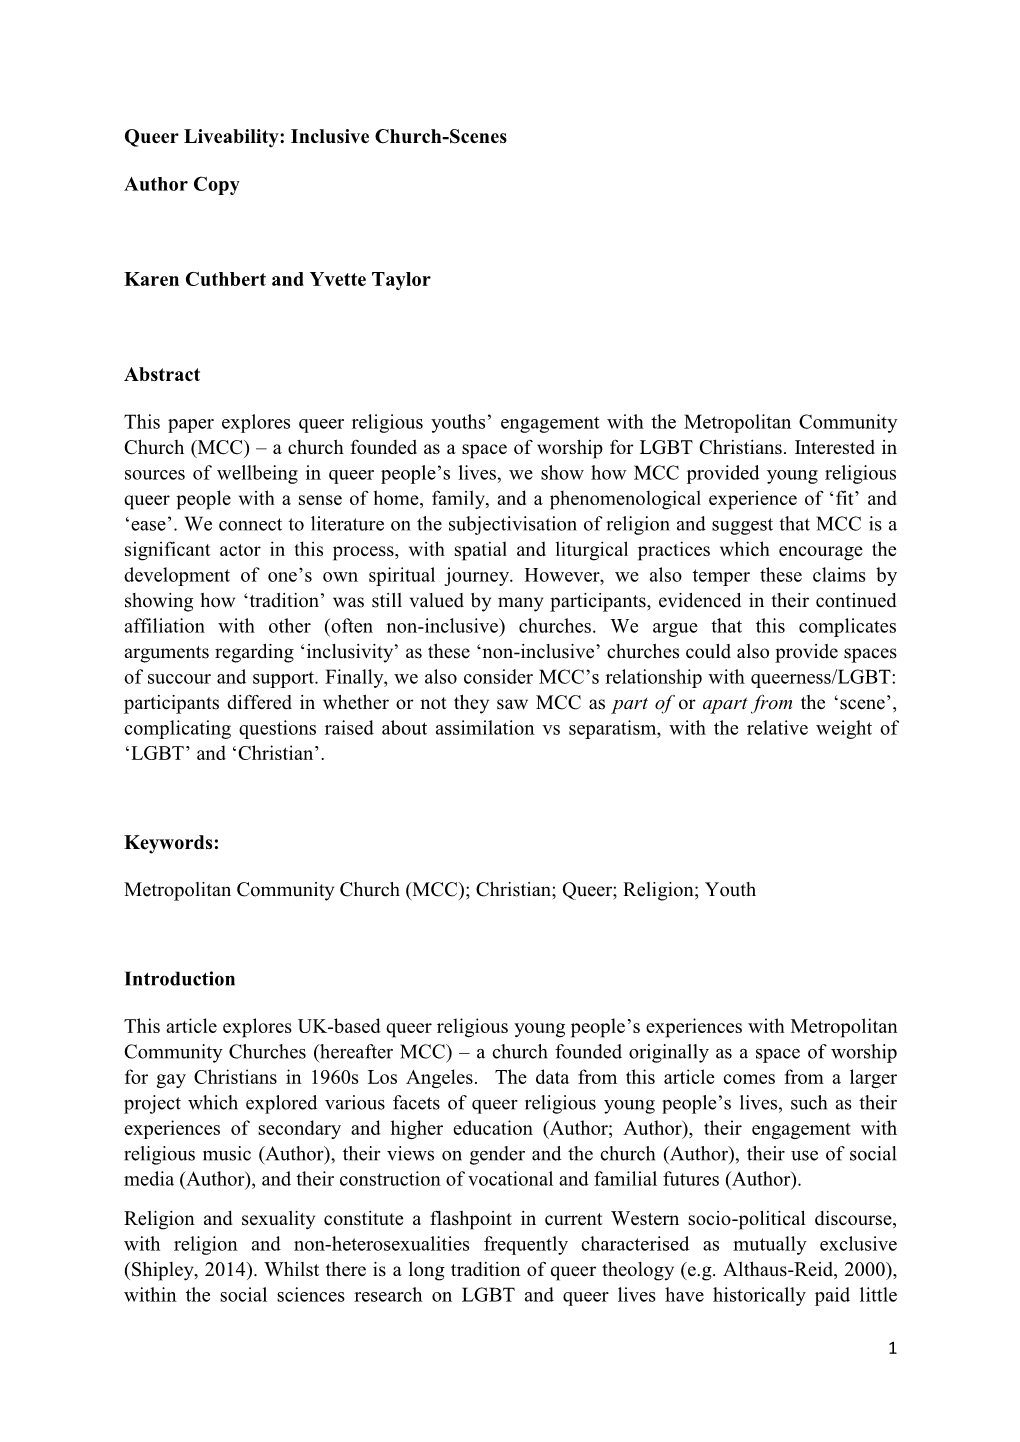 Queer Liveability: Inclusive Church-Scenes Author Copy Karen Cuthbert and Yvette Taylor Abstract This Paper Explores Queer